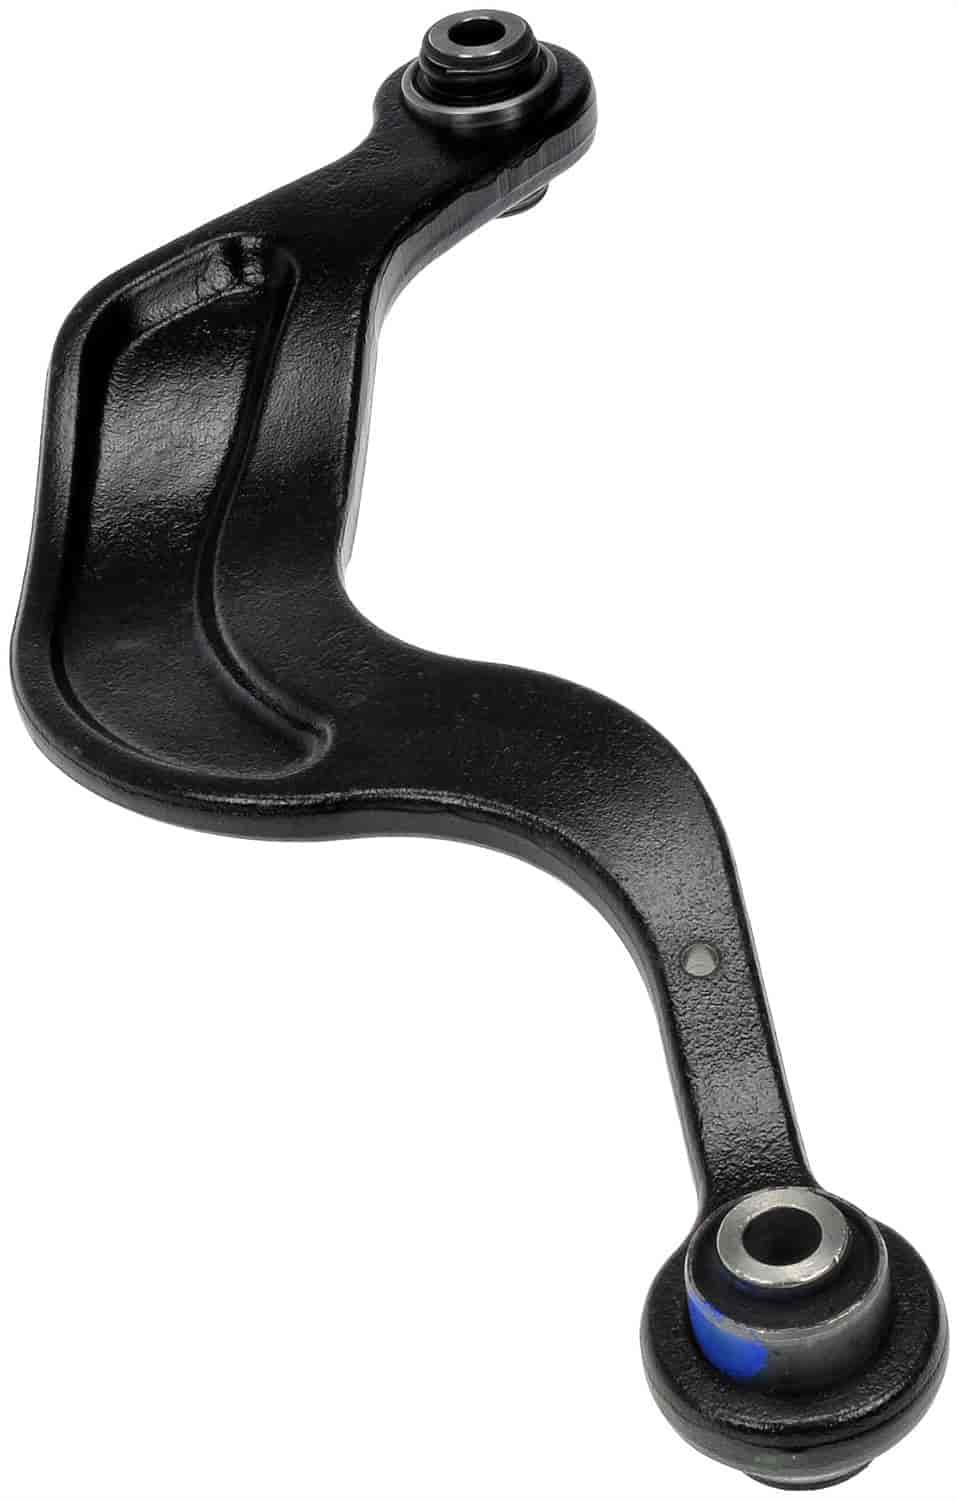 Upper Control Arm 2007-2010 Saturn Outlook, 2007-2015 GMC Acadia, 2008-2015 Buick Enclave, 2009-2015 Chevy Traverse - Rear Right